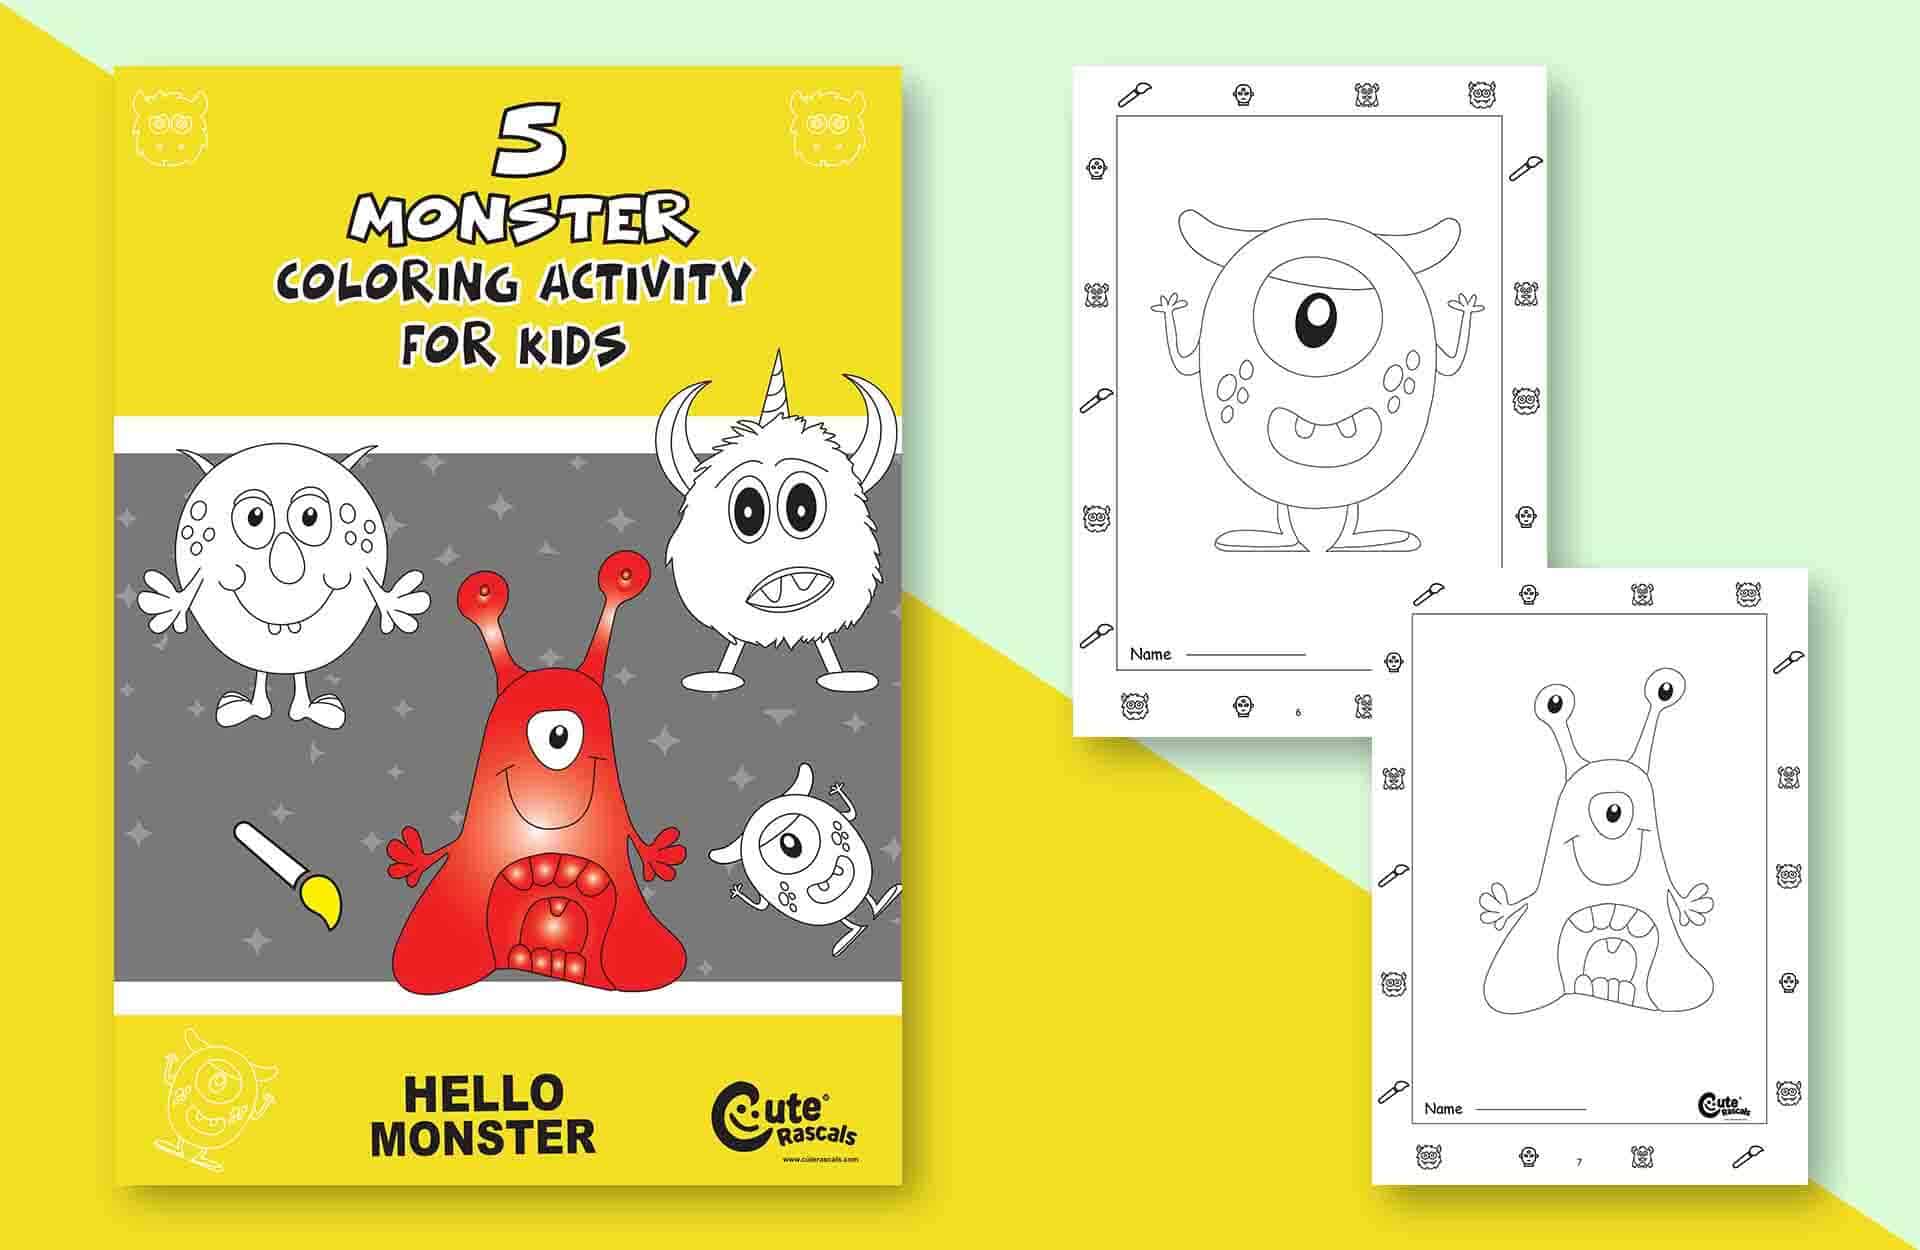 5 Silly Monster Coloring Pages for Kids to Enjoy